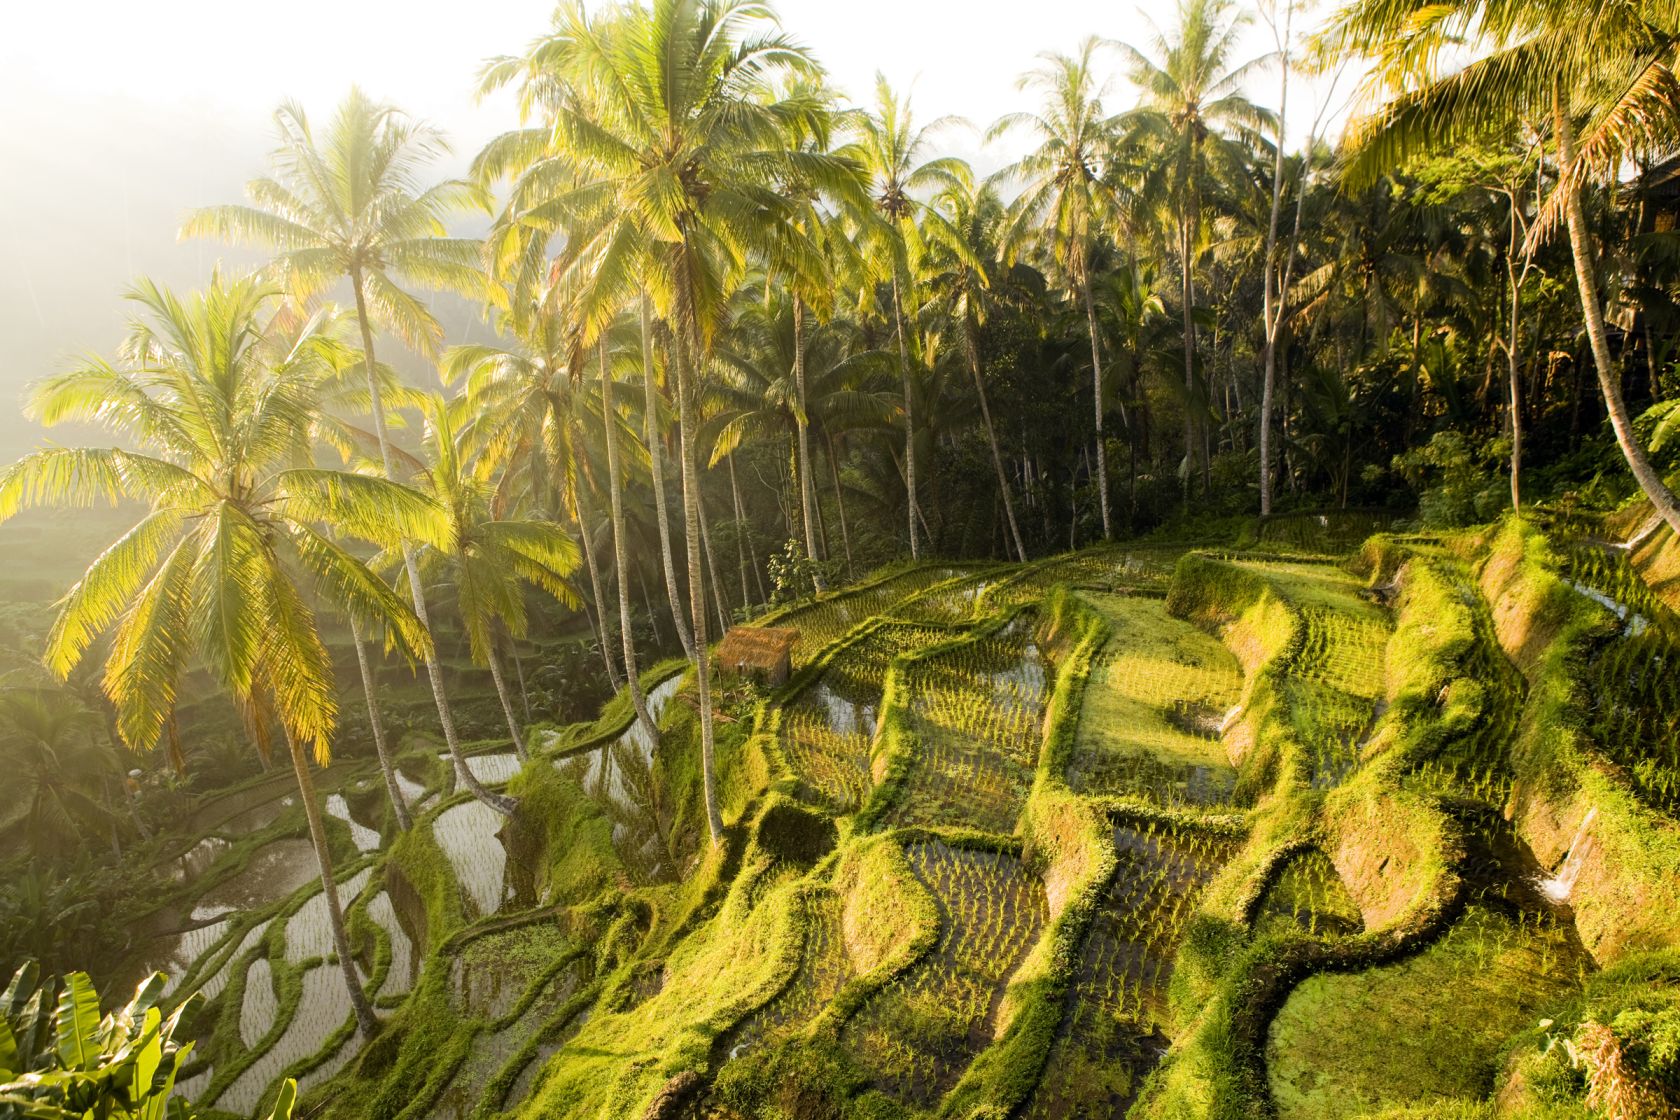 "The rice terraces of Tegallalang, Bali, Indonesia located near the town of Ubud."